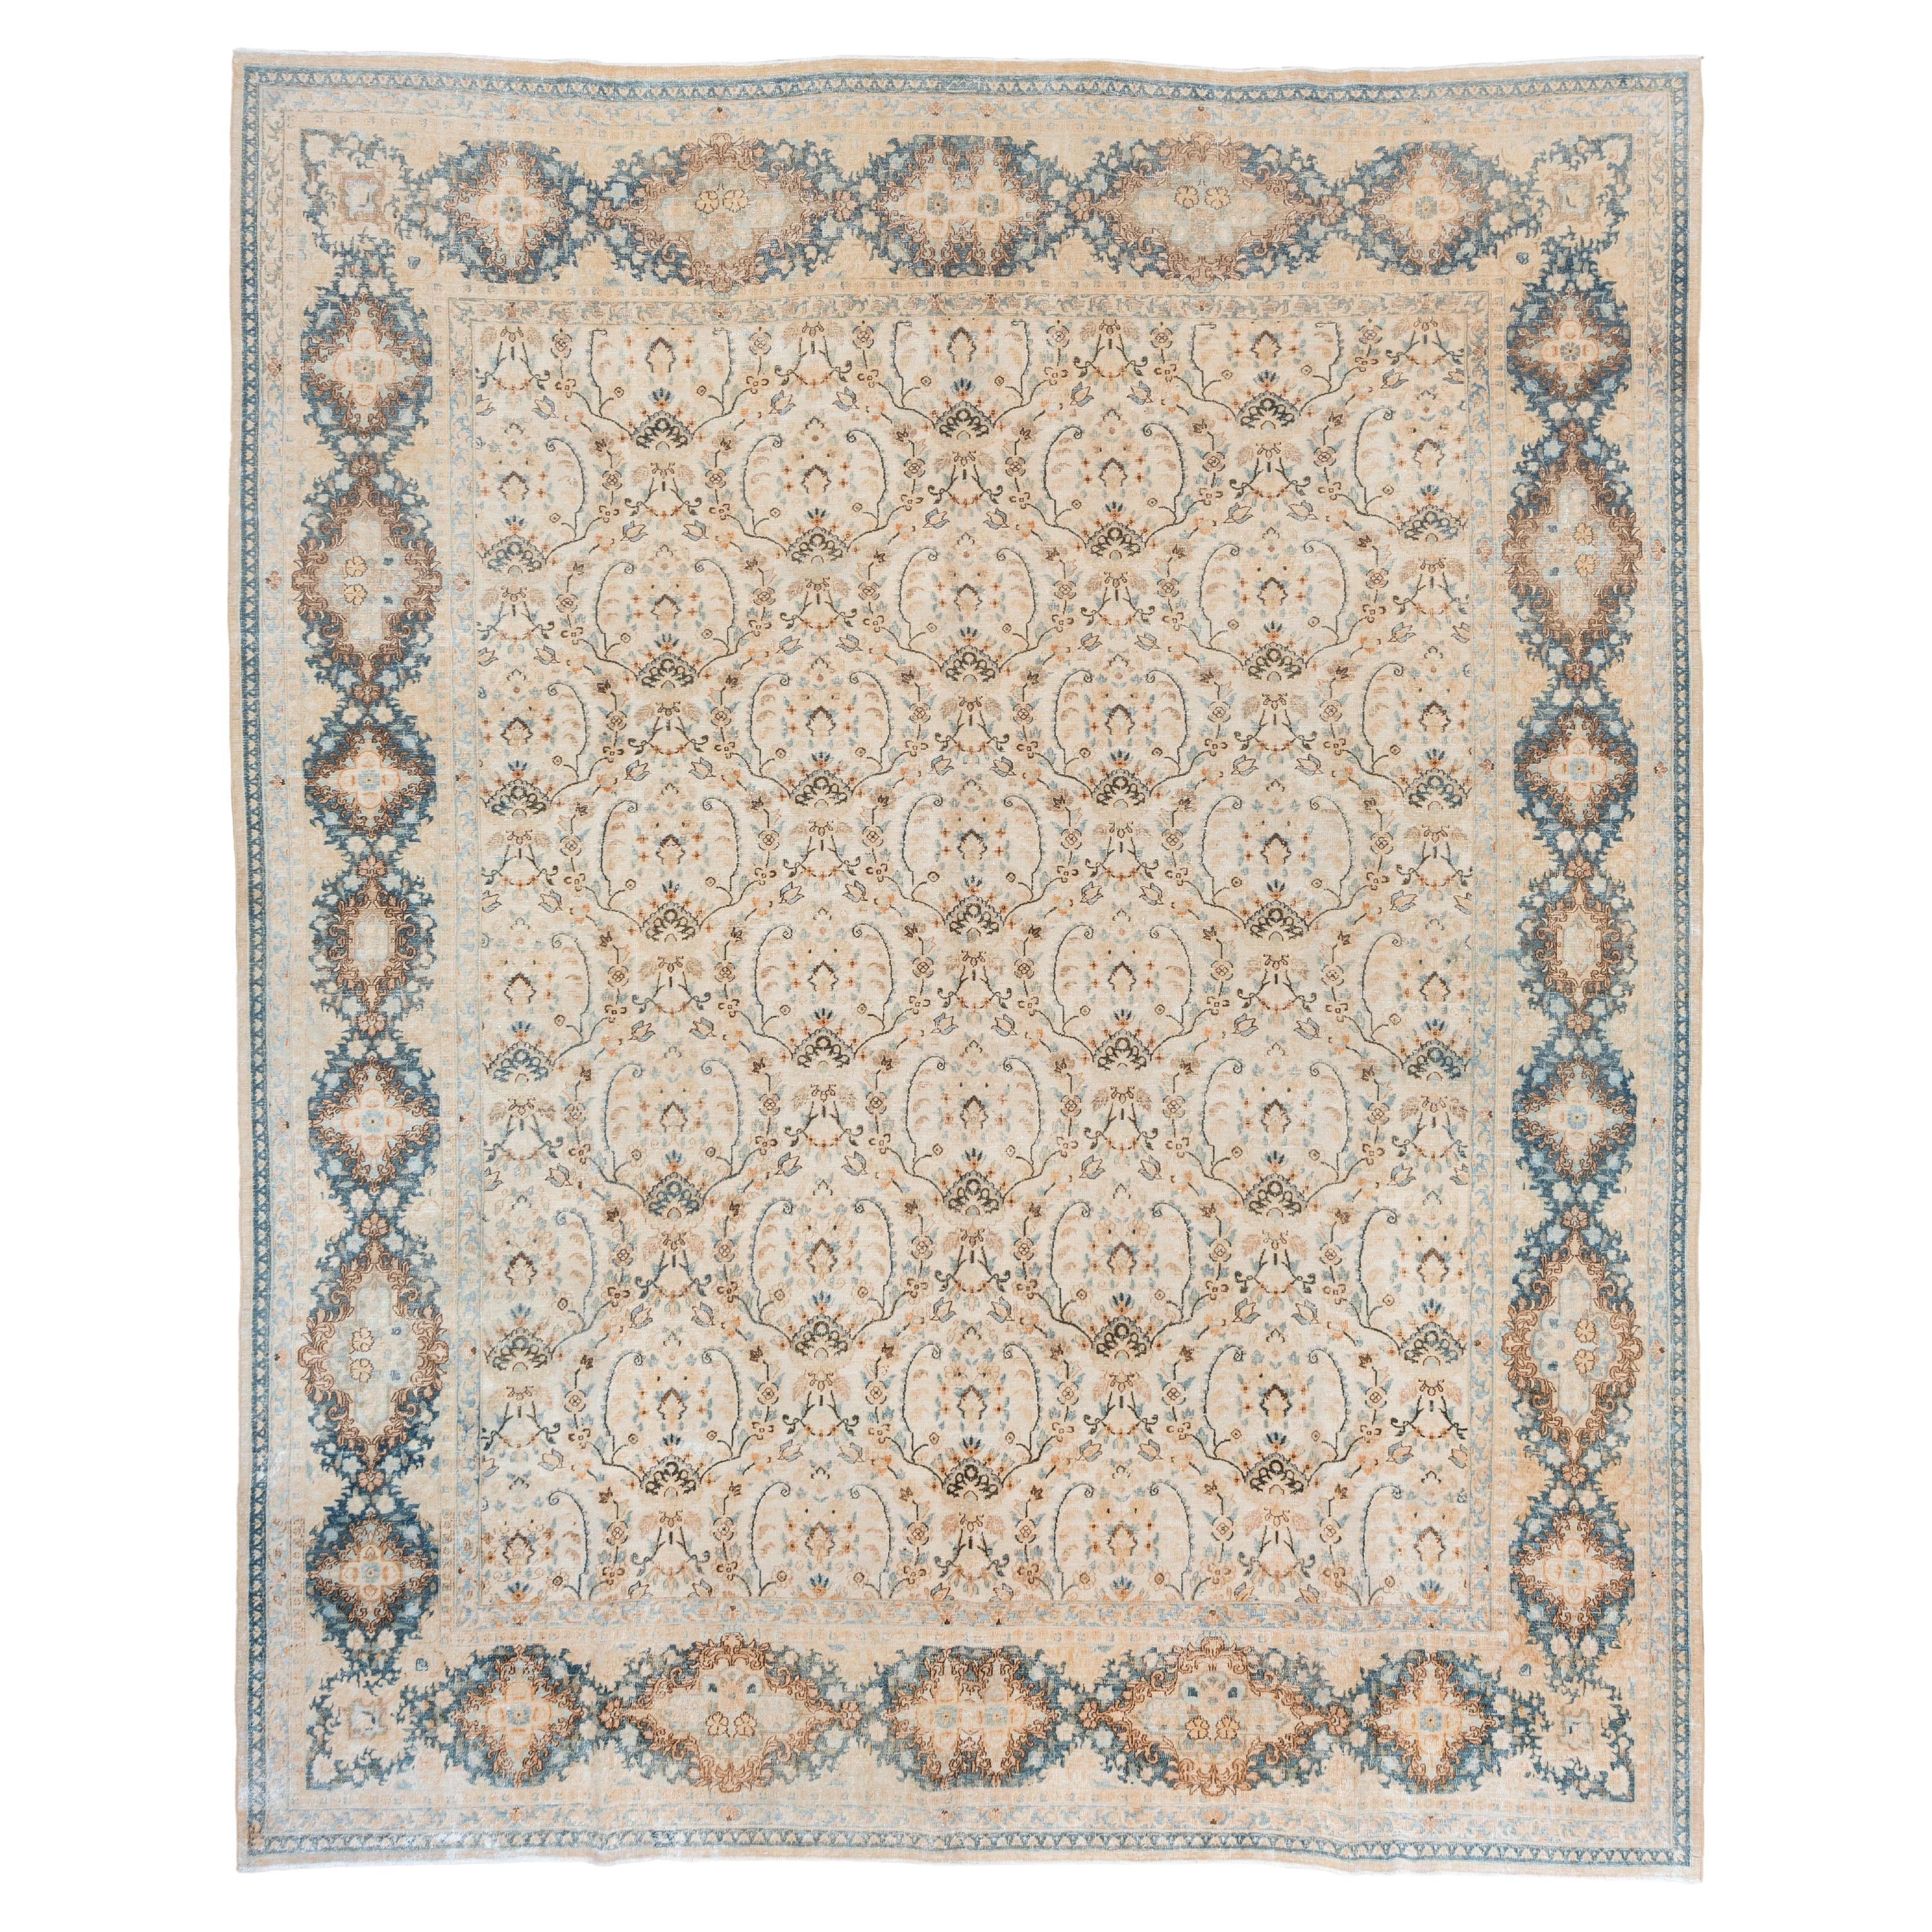 Eliko Rugs by David Ariel Antique Kerman Rug, Allover Field, Teal Accents